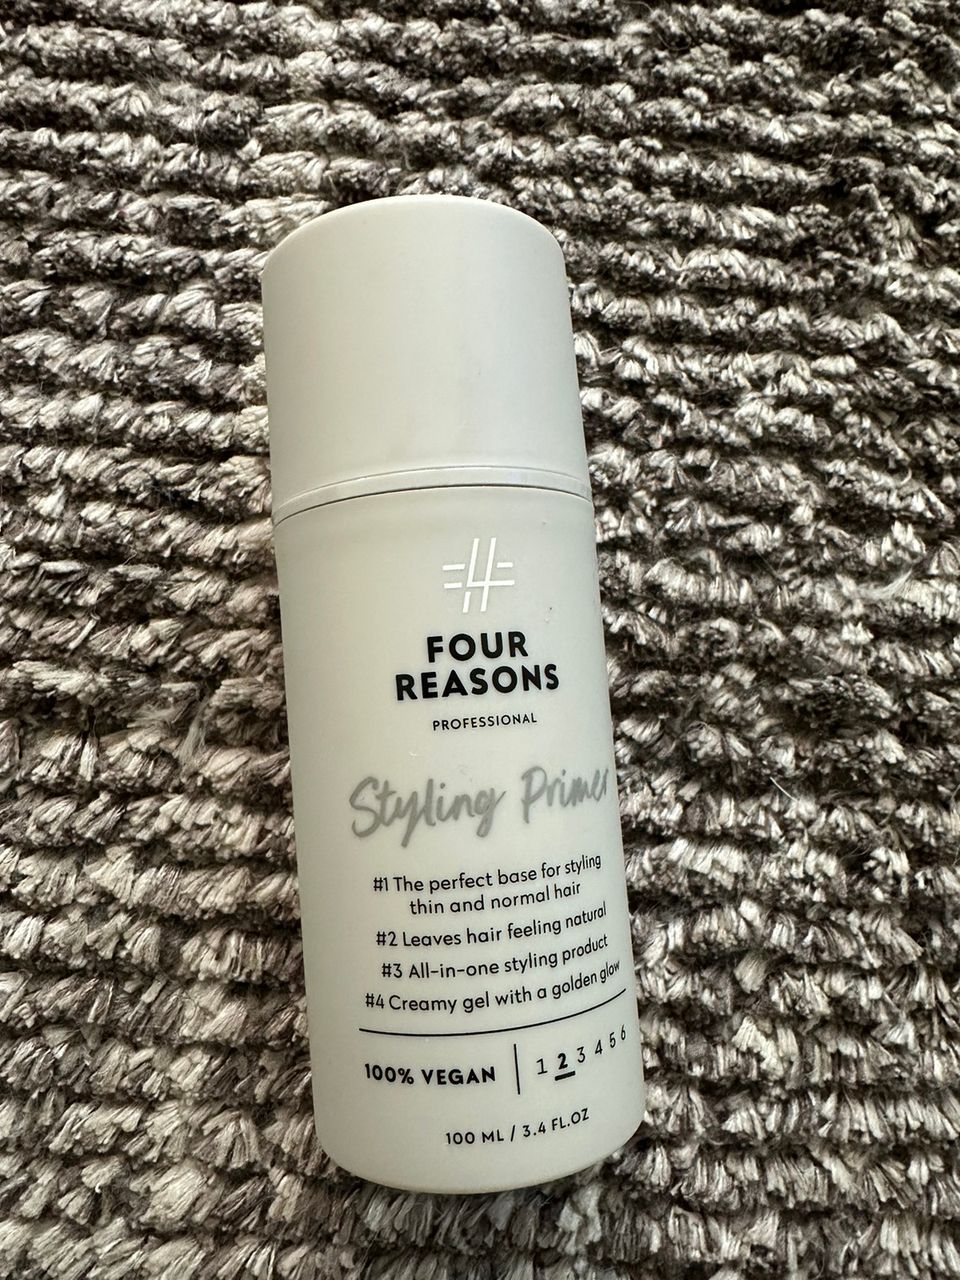 Four reason styling primer